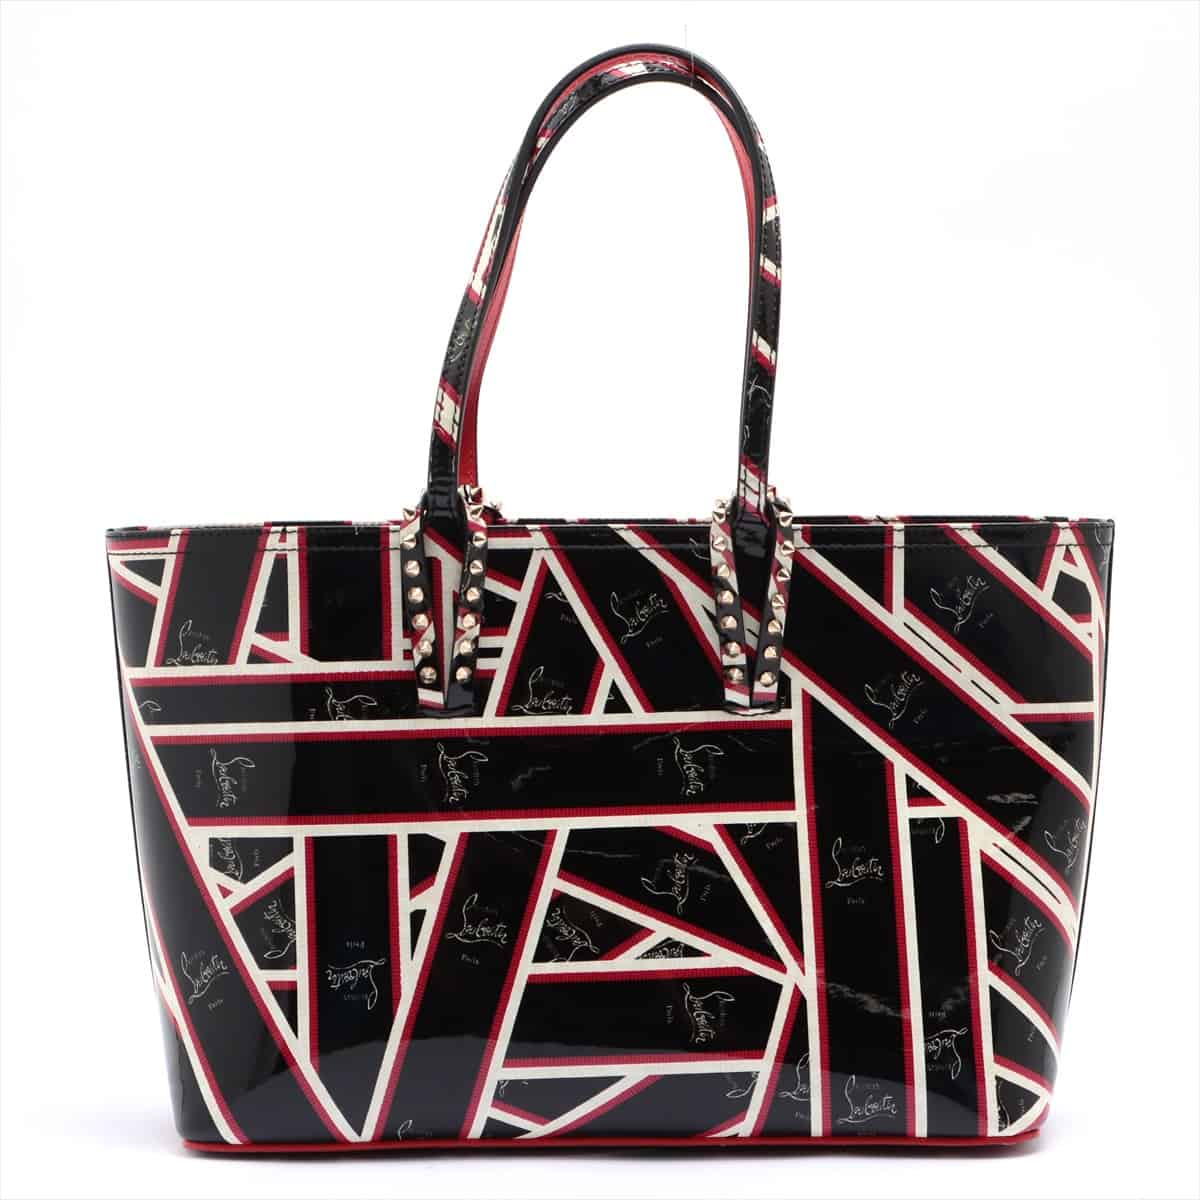 Christian Louboutin Cabata Patent leather Tote bag Multicolor with pouch